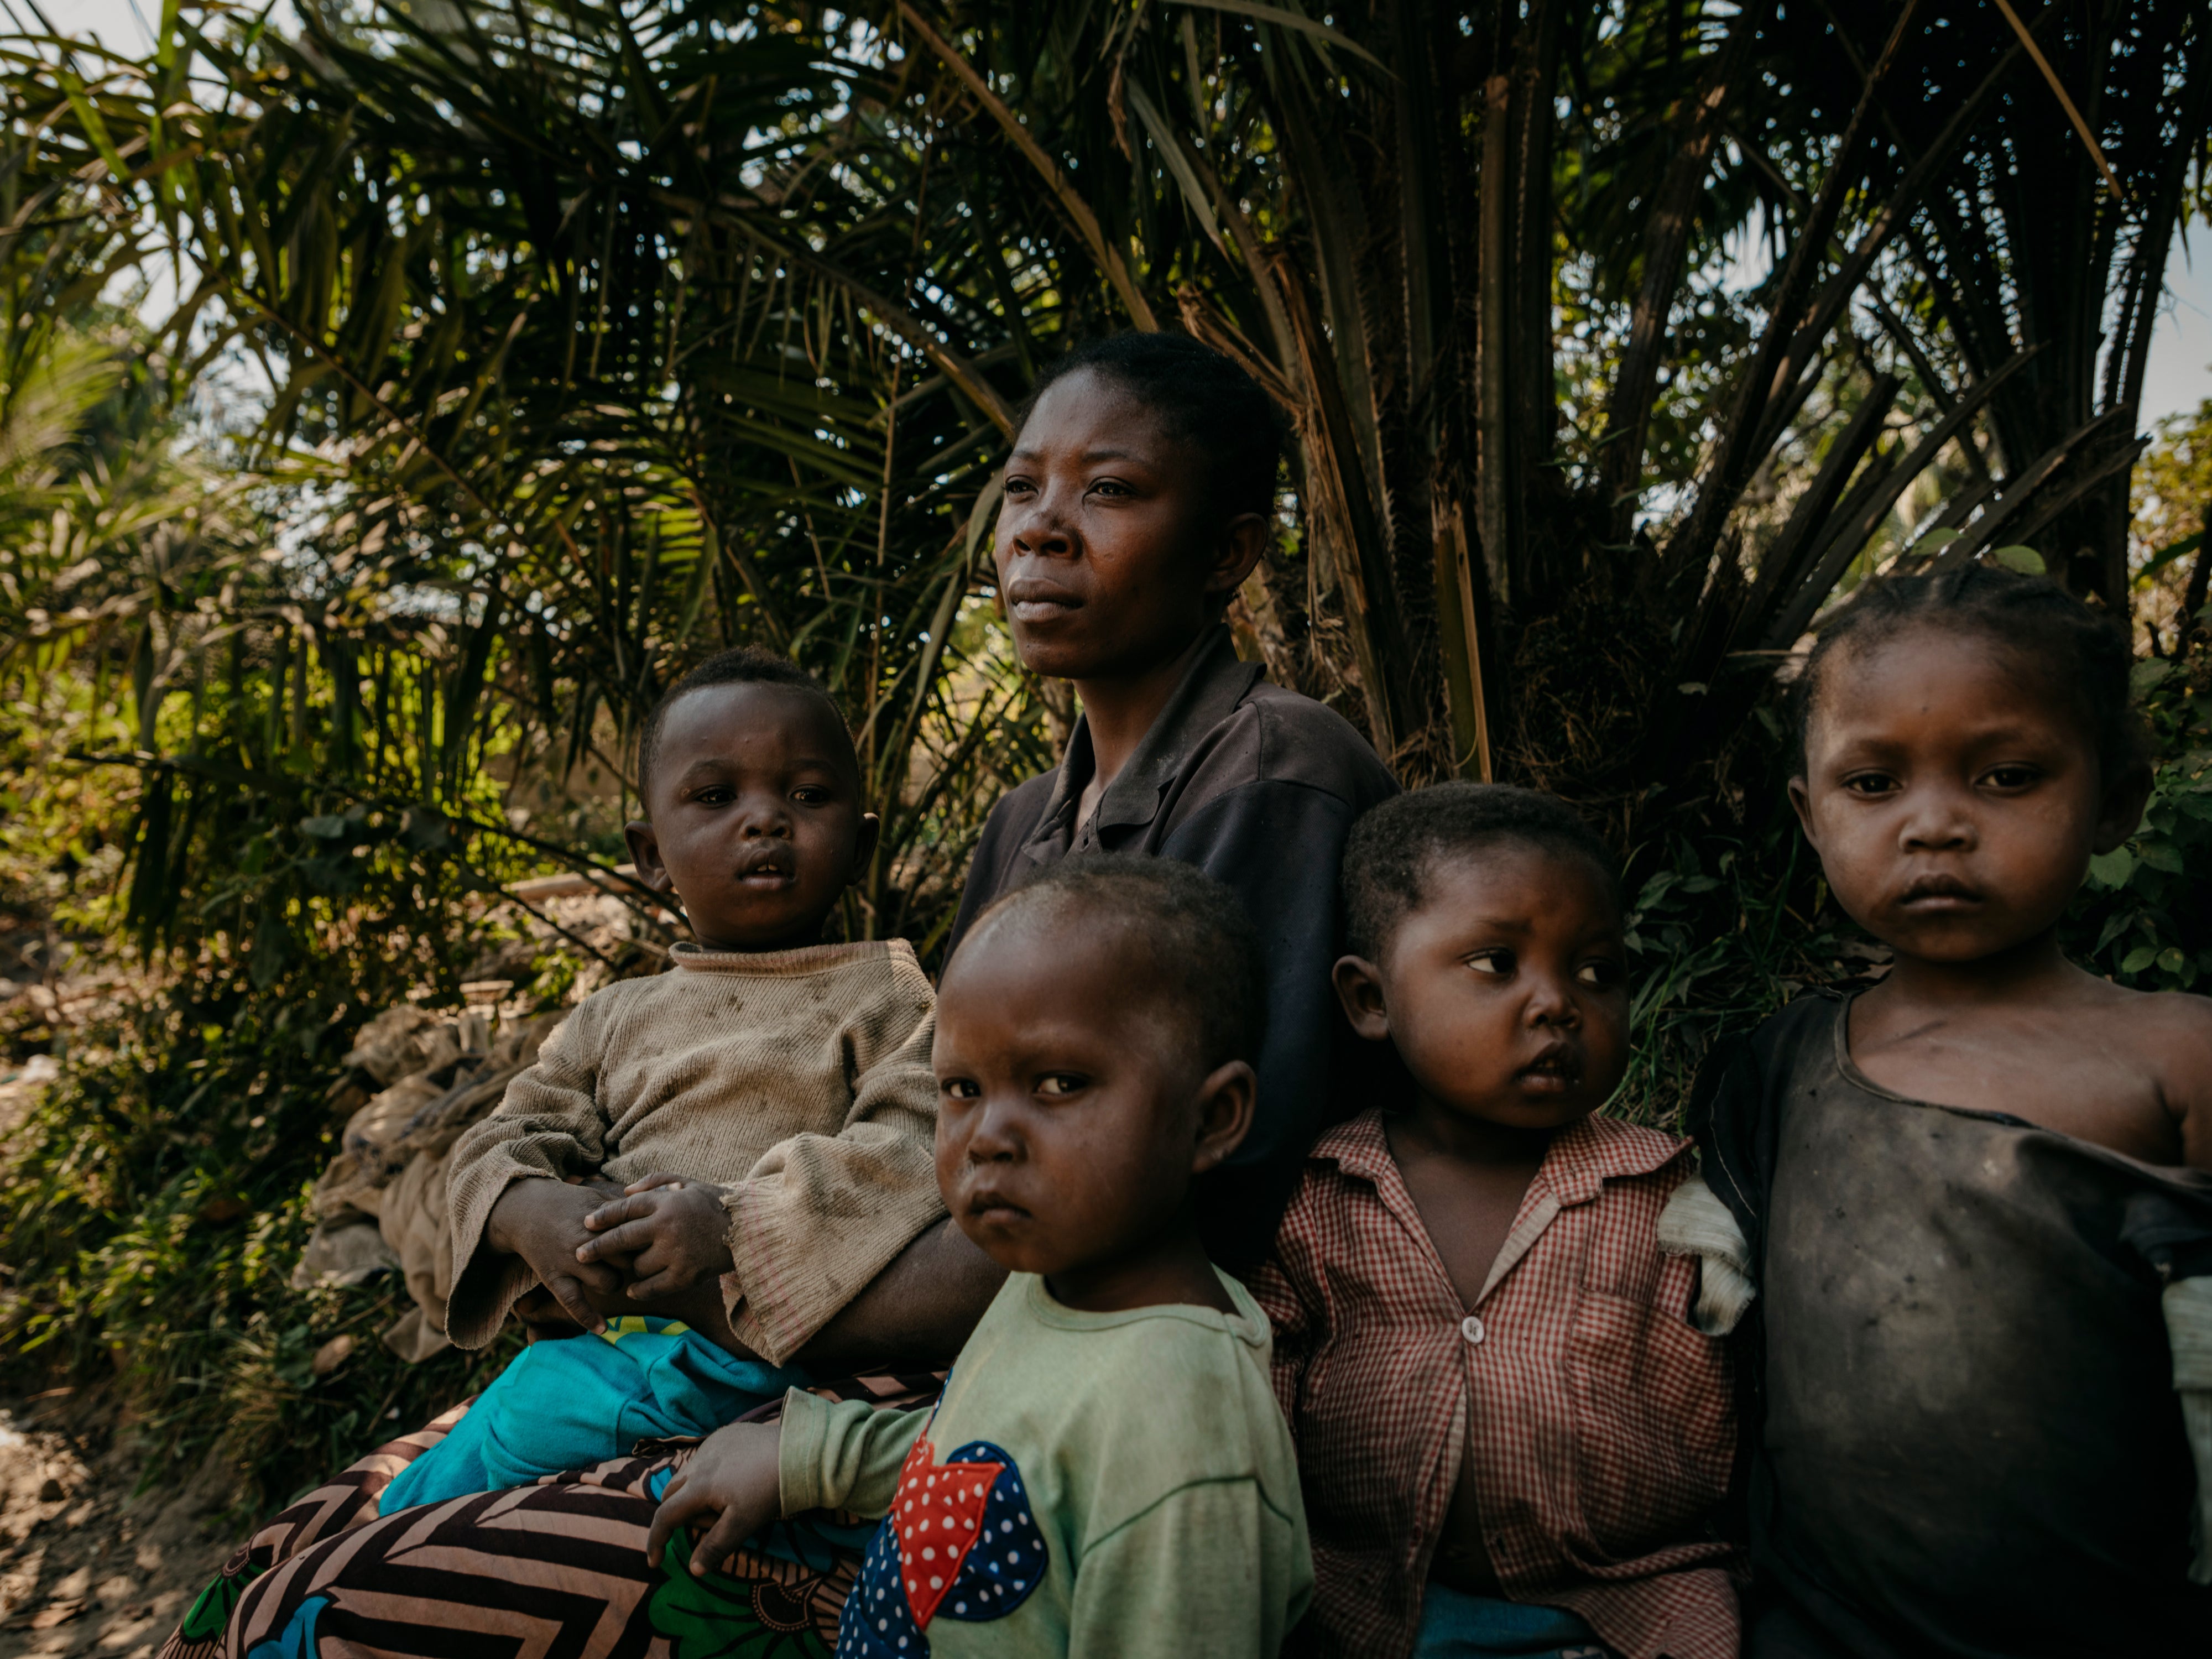 Marie*, 36, poses for a portrait with her children Freddy*, 1, Joseph*, 2, Claris*, 3, and Micheline*, 4, in Lomami province